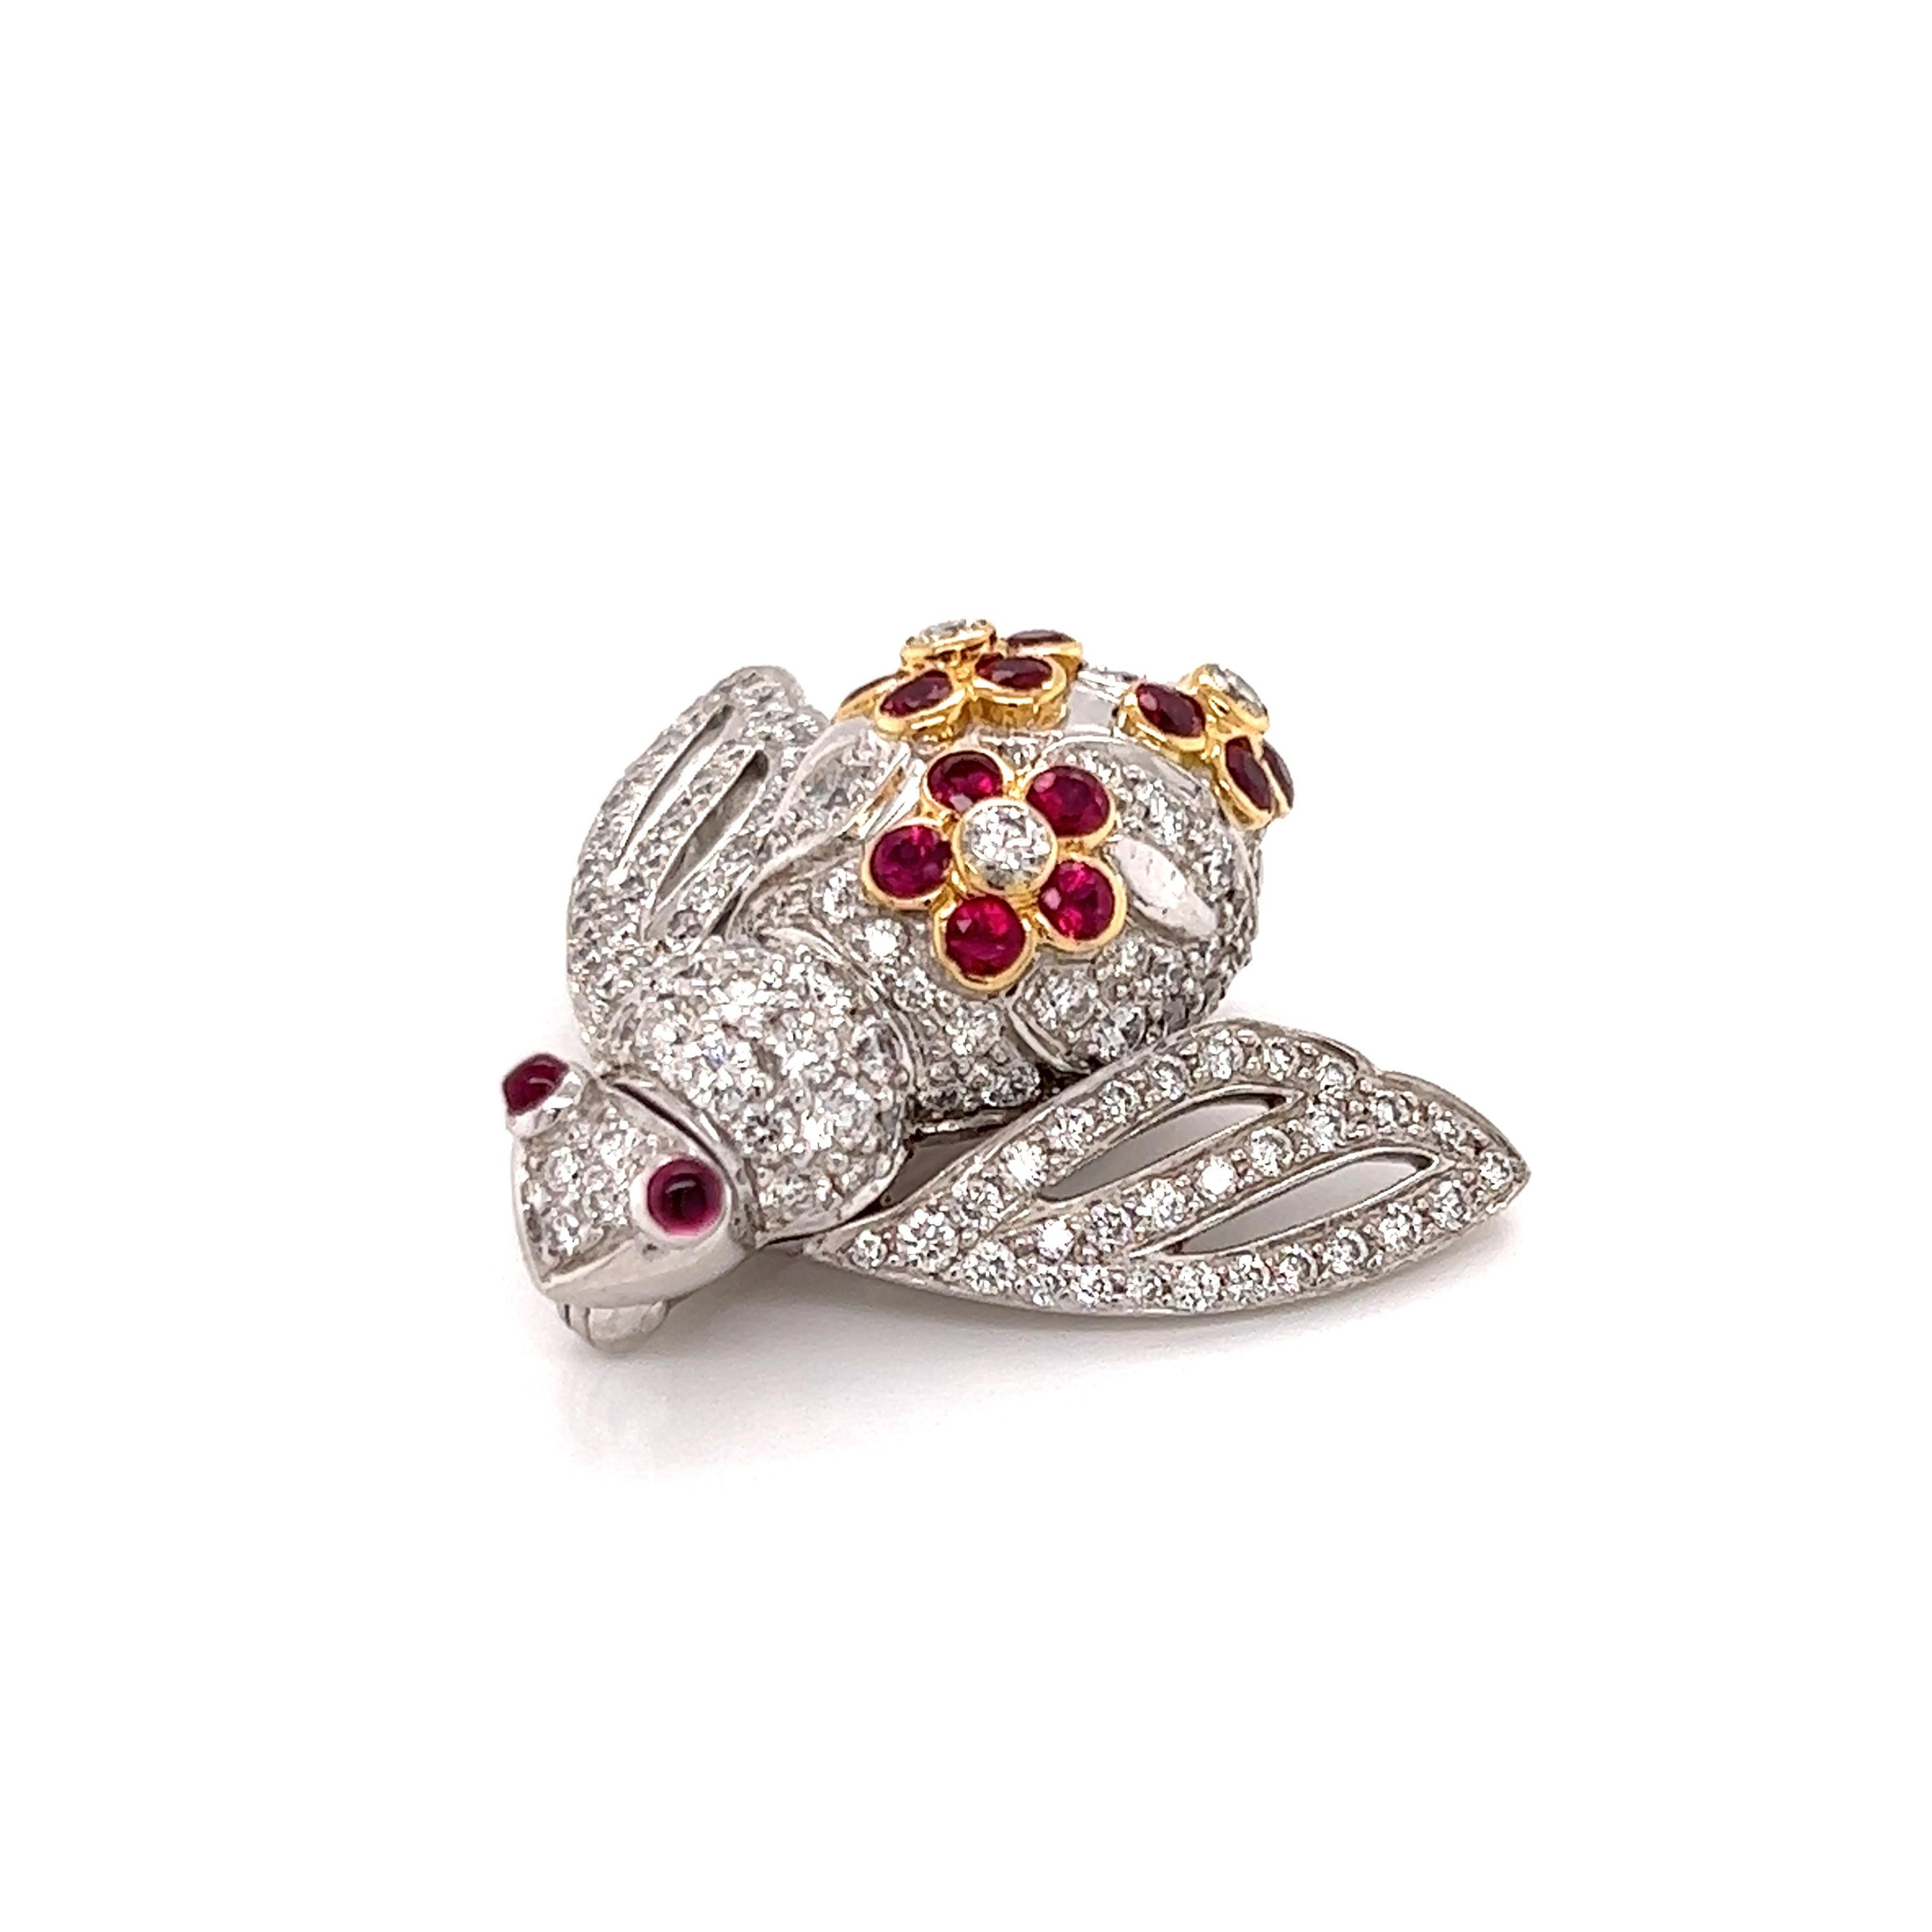 This eye-catching authentic bee brooch is by Italian designer Sabbadini, it is crafted from 18k white gold with yellow gold accent. The body and wings of the bee is fully decorated with diamonds, the eyes are two small cabochon rubies. On the back